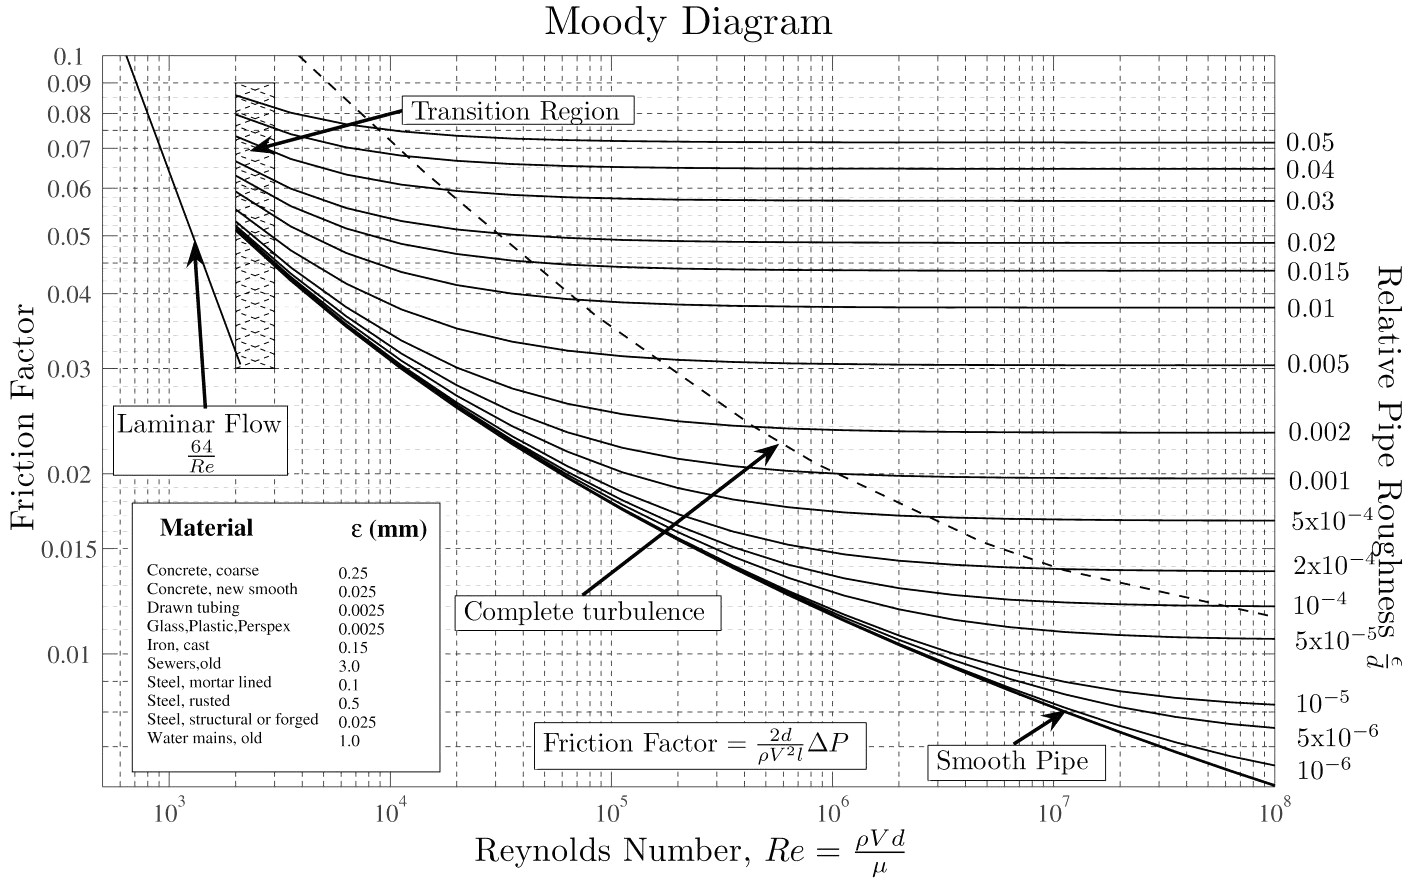 A Moody diagram is empirical and takes into account a number of concepts that the Bernoulli's equation does not consider.